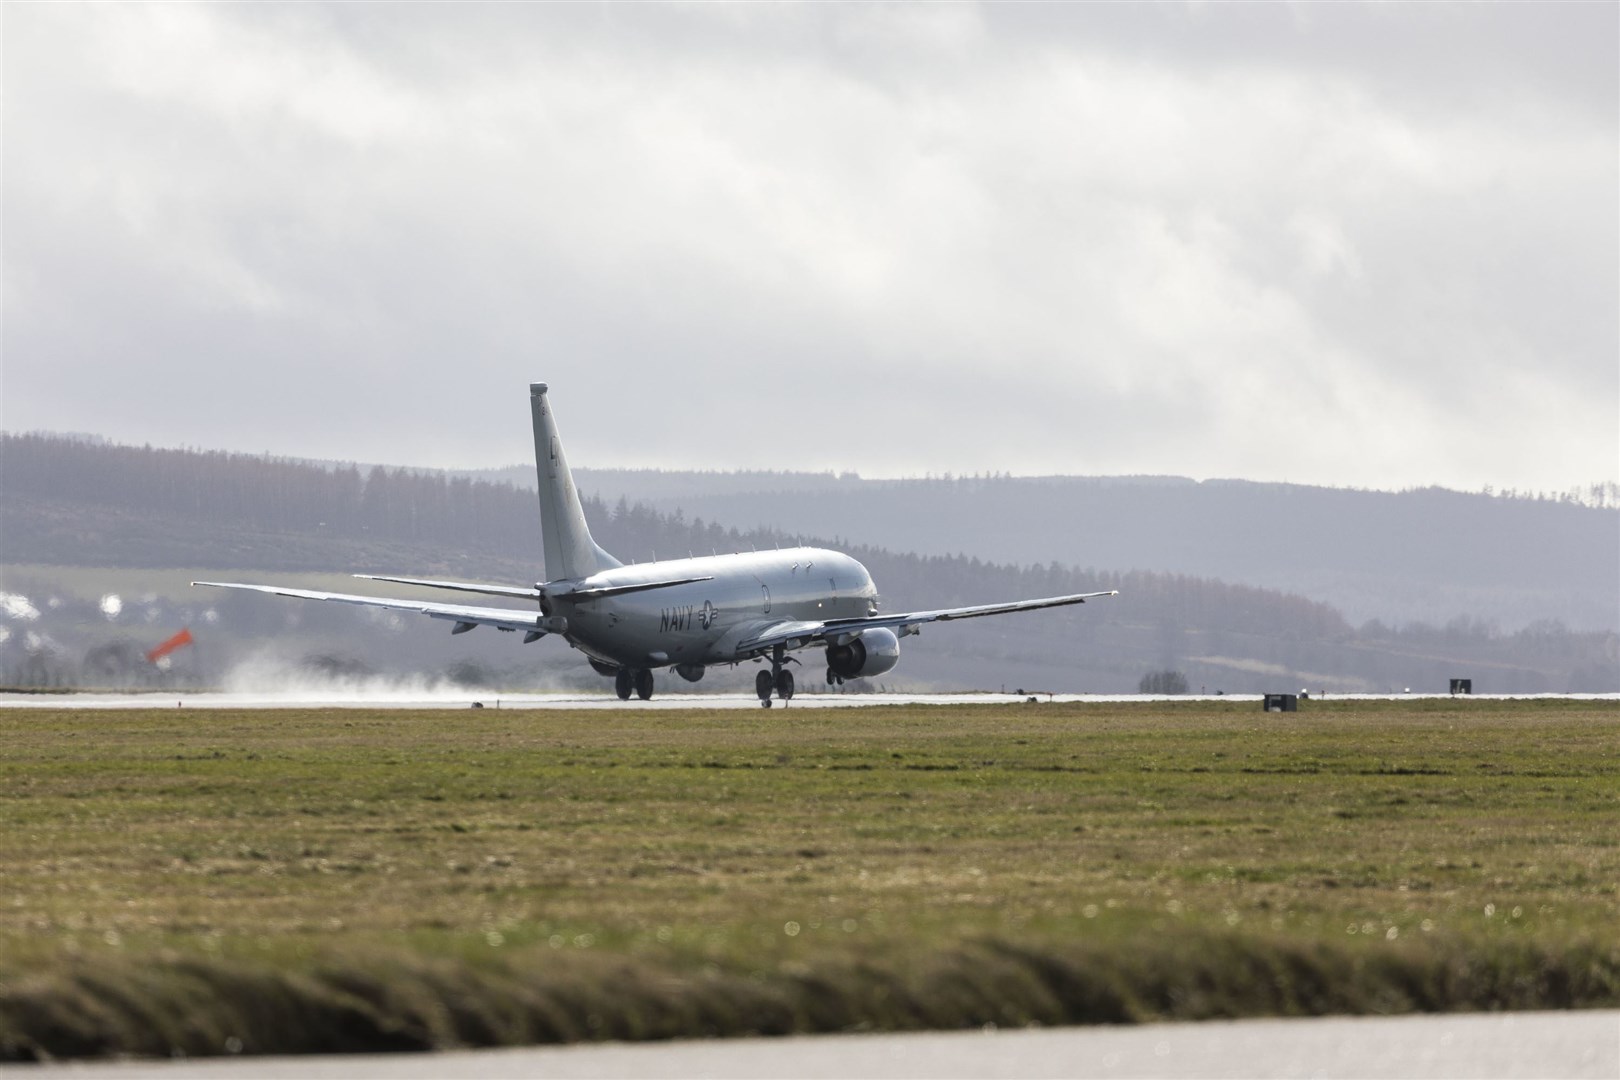 A P-8 Poseidon takes off from RAF Lossiemouth.